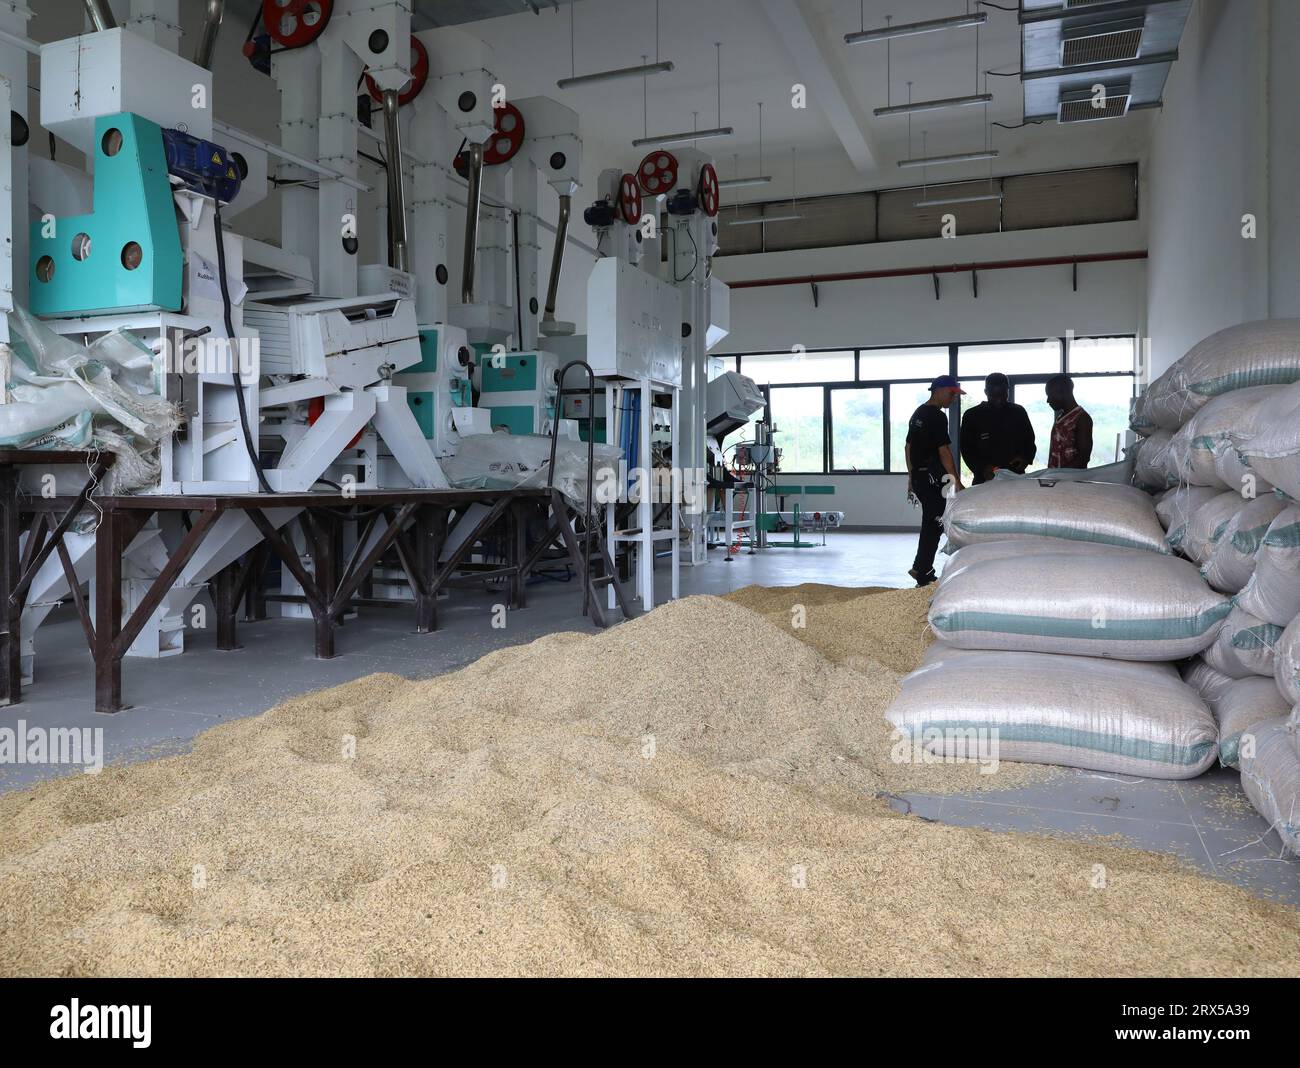 Abuja, Nigerian Agricultural Technology Demonstration Center in Abuja. 6th Dec, 2022. This photo taken on Sept. 19, 2023 shows a rice milling processing room at the Nigerian Agricultural Technology Demonstration Center in Abuja, Nigeria. The China-aided Nigerian Agricultural Technology Demonstration Center is located in the CGCOC Agriculture Abuja High-tech Industrial Park in Abuja. Construction of the project started in March 2021 and completed in Sept. 2022. China handed over the project to Nigeria on Dec. 6, 2022. Credit: Dong Jianghui/Xinhua/Alamy Live News Stock Photo